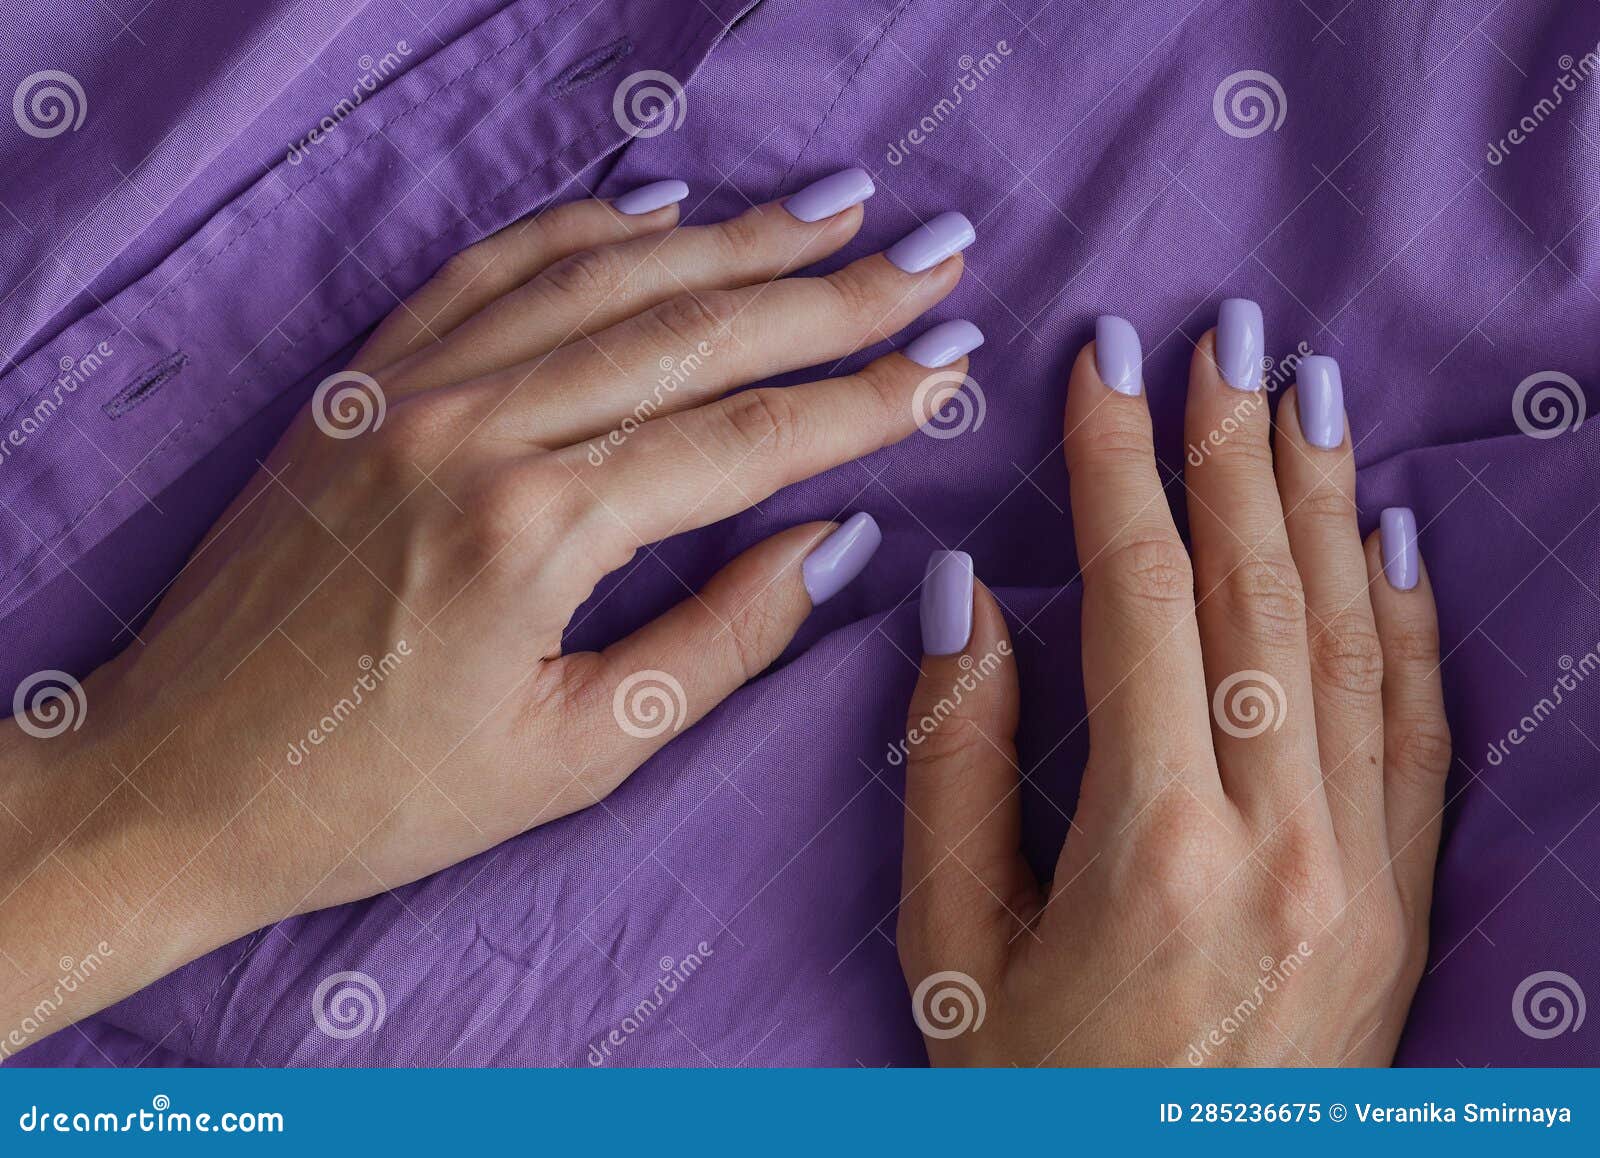 female's hands with gelish manicure and nails of purple color